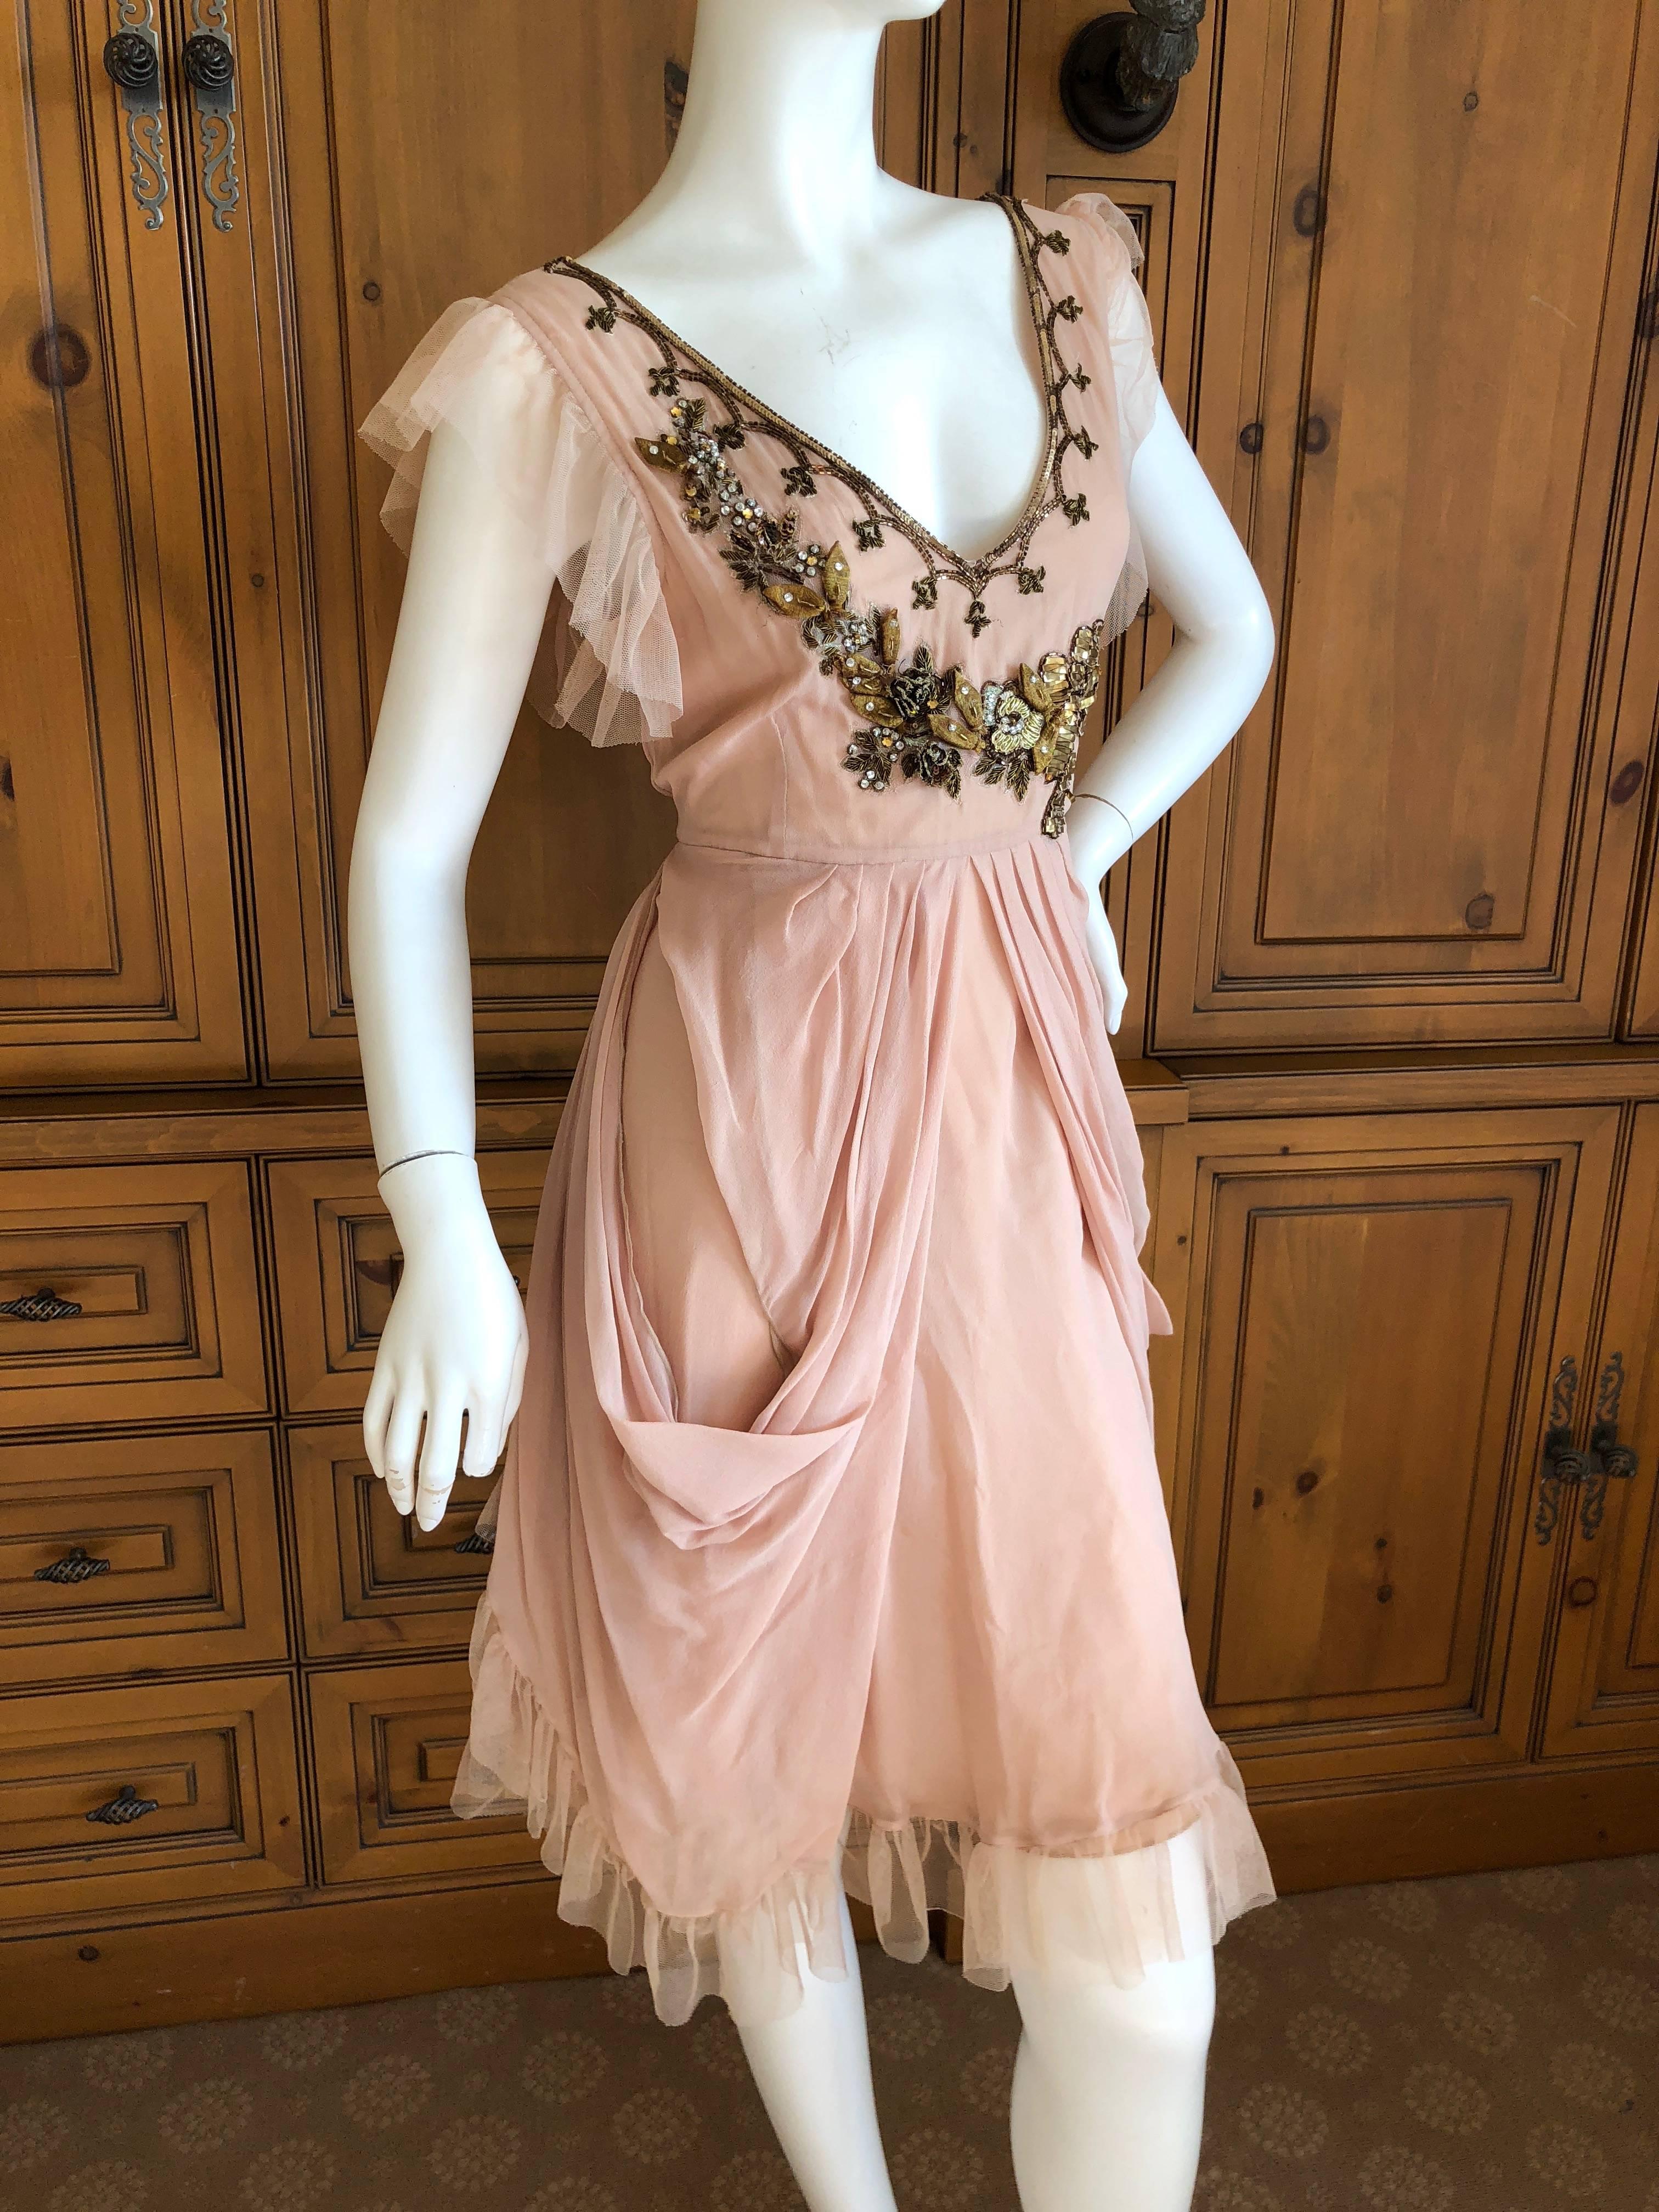 Women's John Galliano Vintage Embellished Draped Cocktail Dress New With Tags